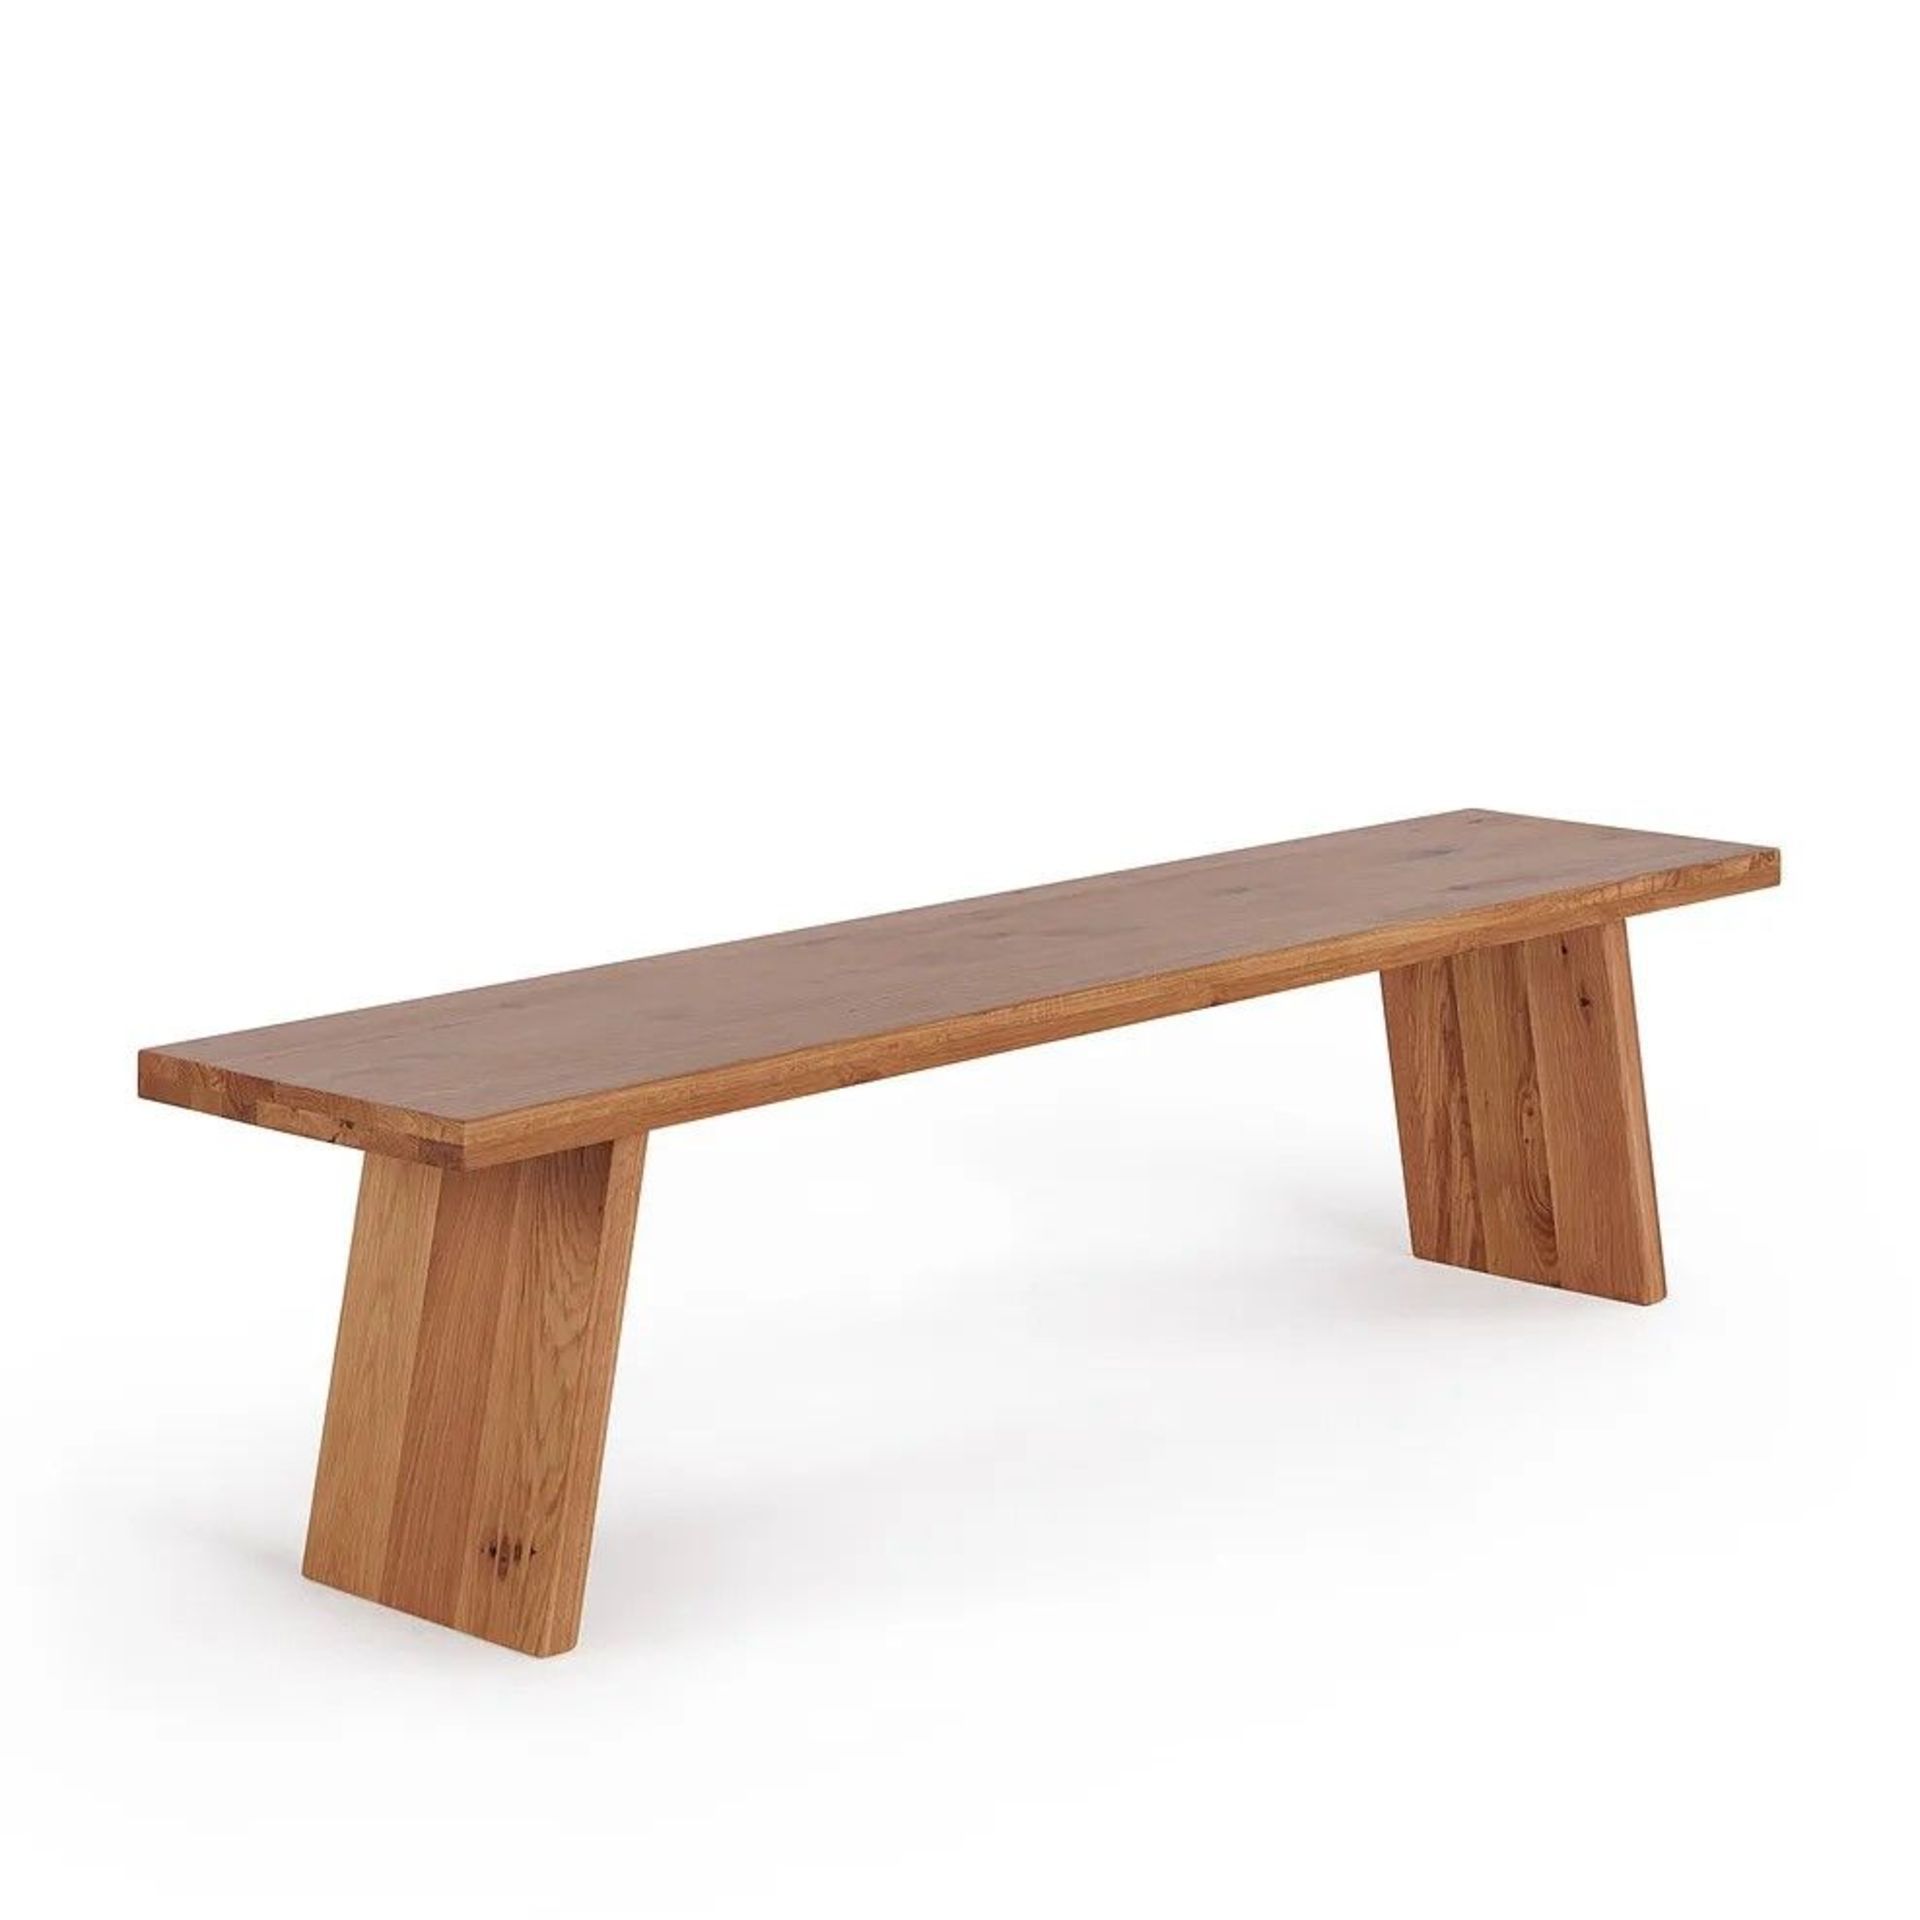 New Boxed - Cantilever Natural Solid Oak Bench. 180cm Long. RRP £330. For a more open seating - Image 2 of 2